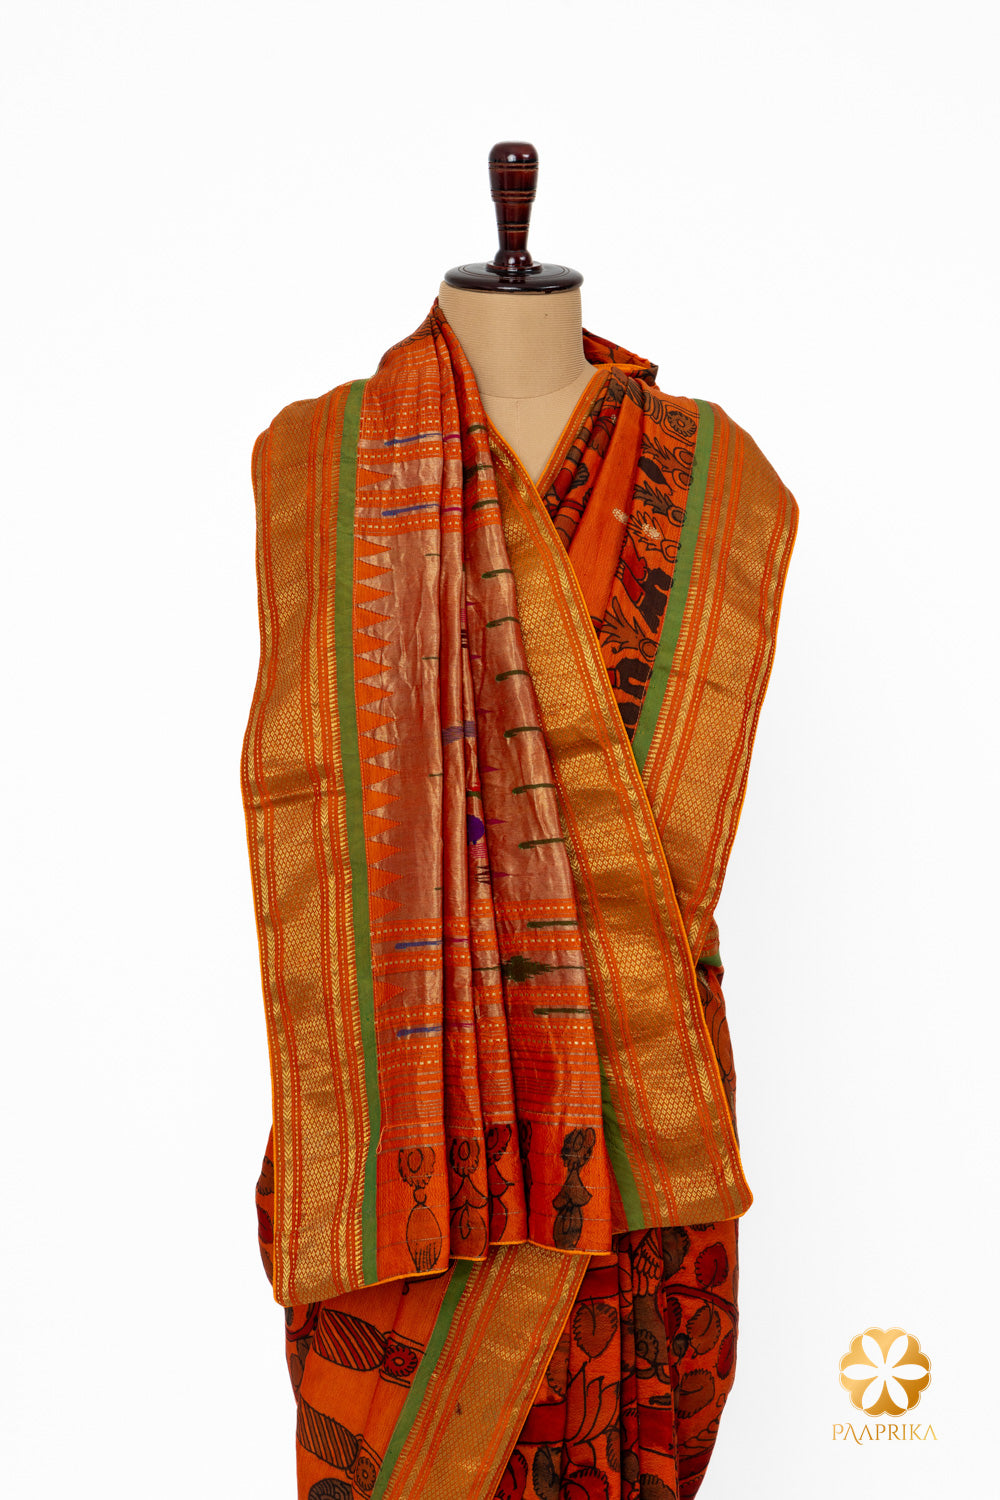 A full view of the Tussar Silk Saree, draped elegantly, to capture its overall design and craftsmanship.